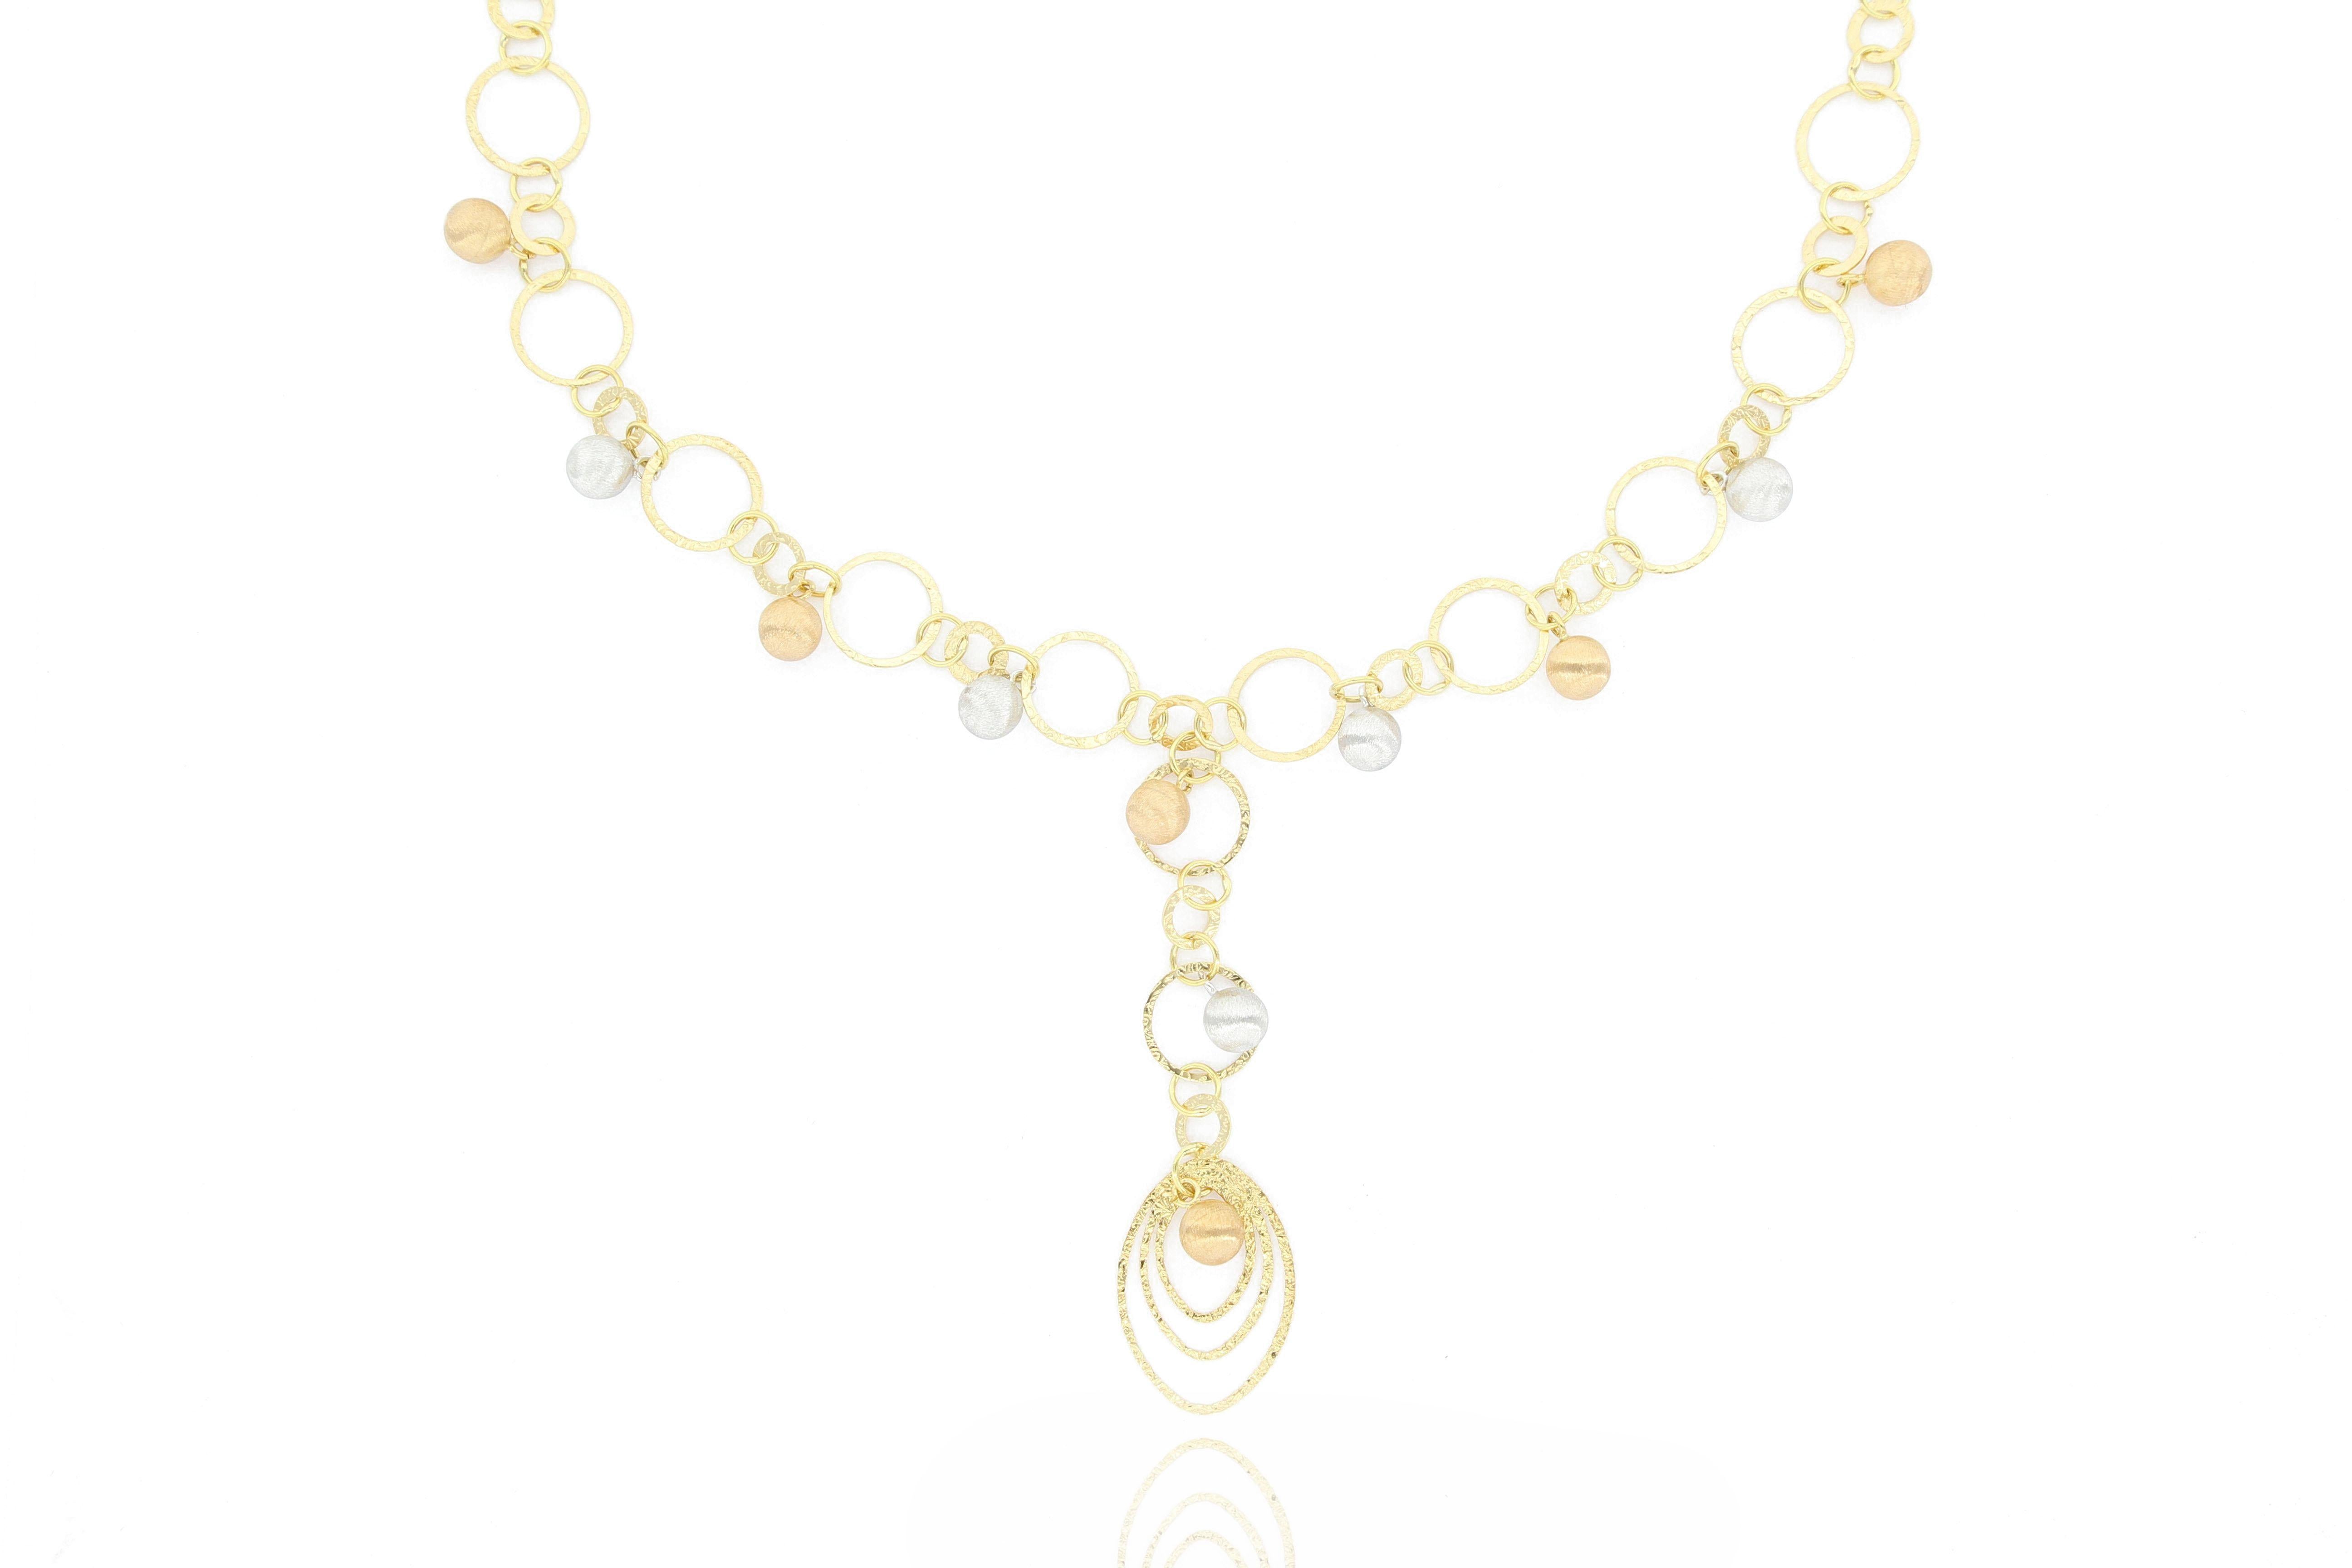 This fabulous 18K gold necklace is designed and made in Italy, unique and stylish. The jewellery piece is decorated with brushed white gold and rose gold dangling balls, perfect accessory for  stylish and casual outfits.
The company was founded one